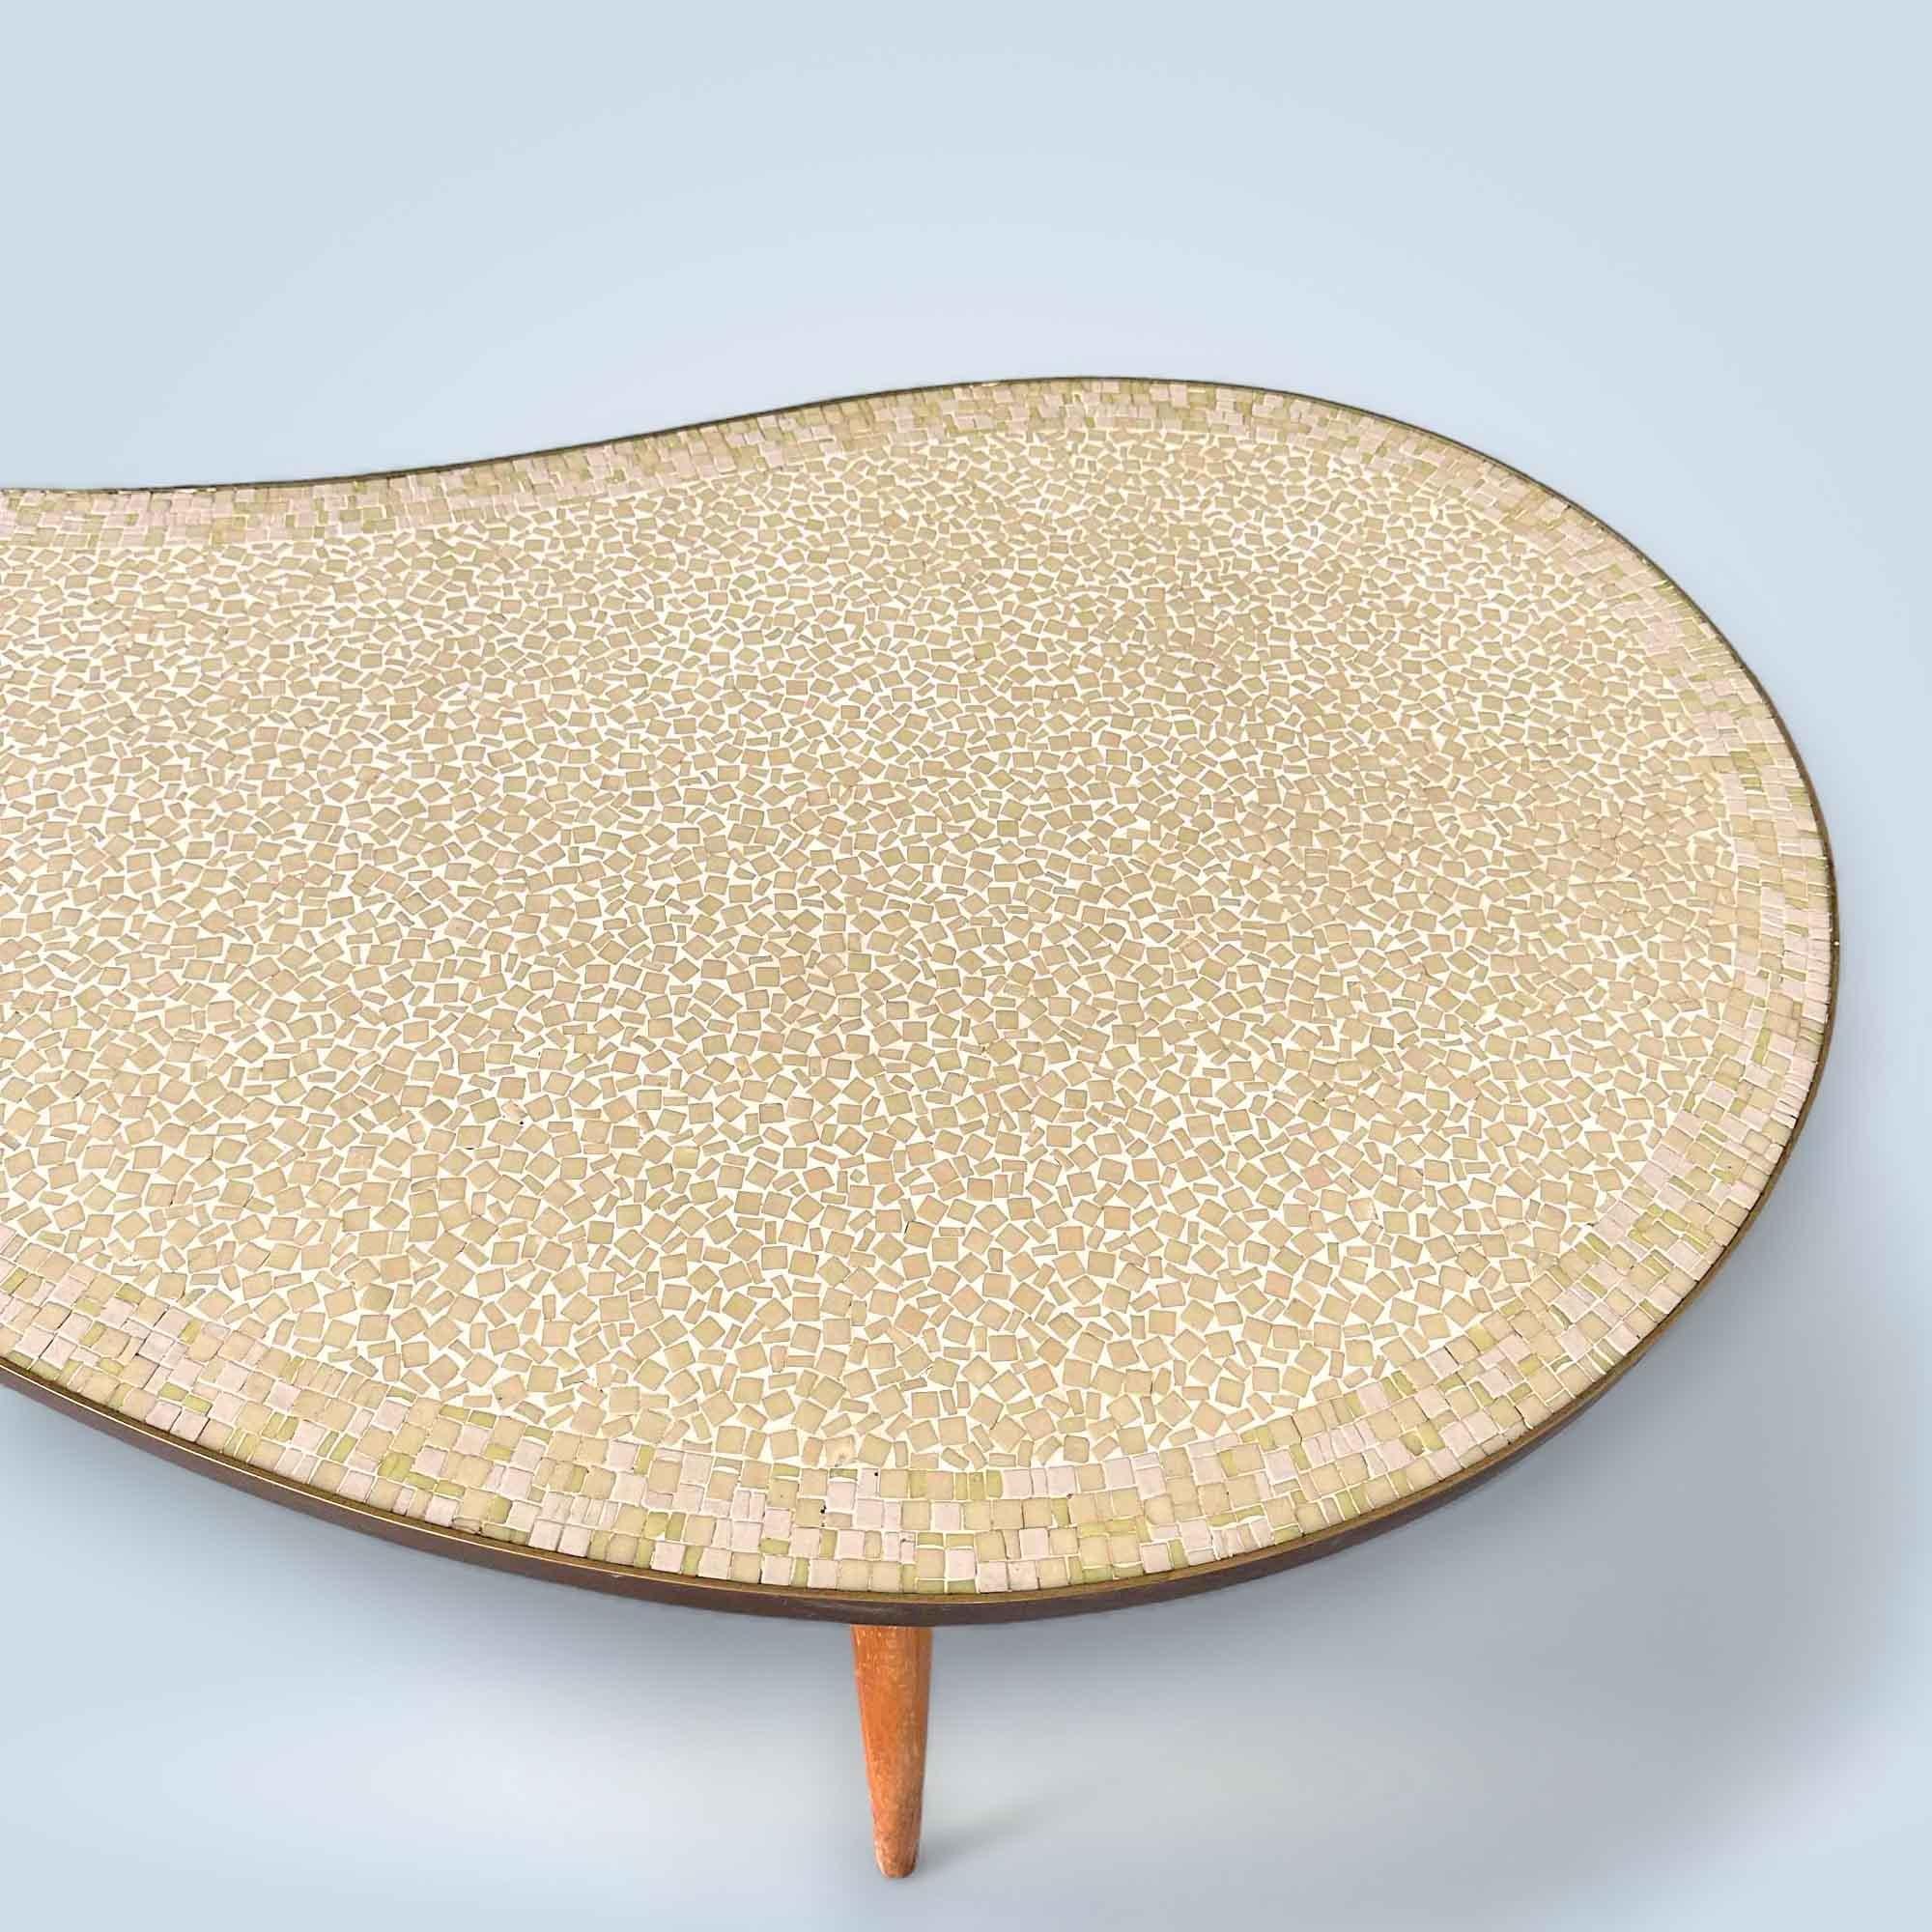 Kidney Shaped Coffee Table with Mosaic Tiles, 1960s 1